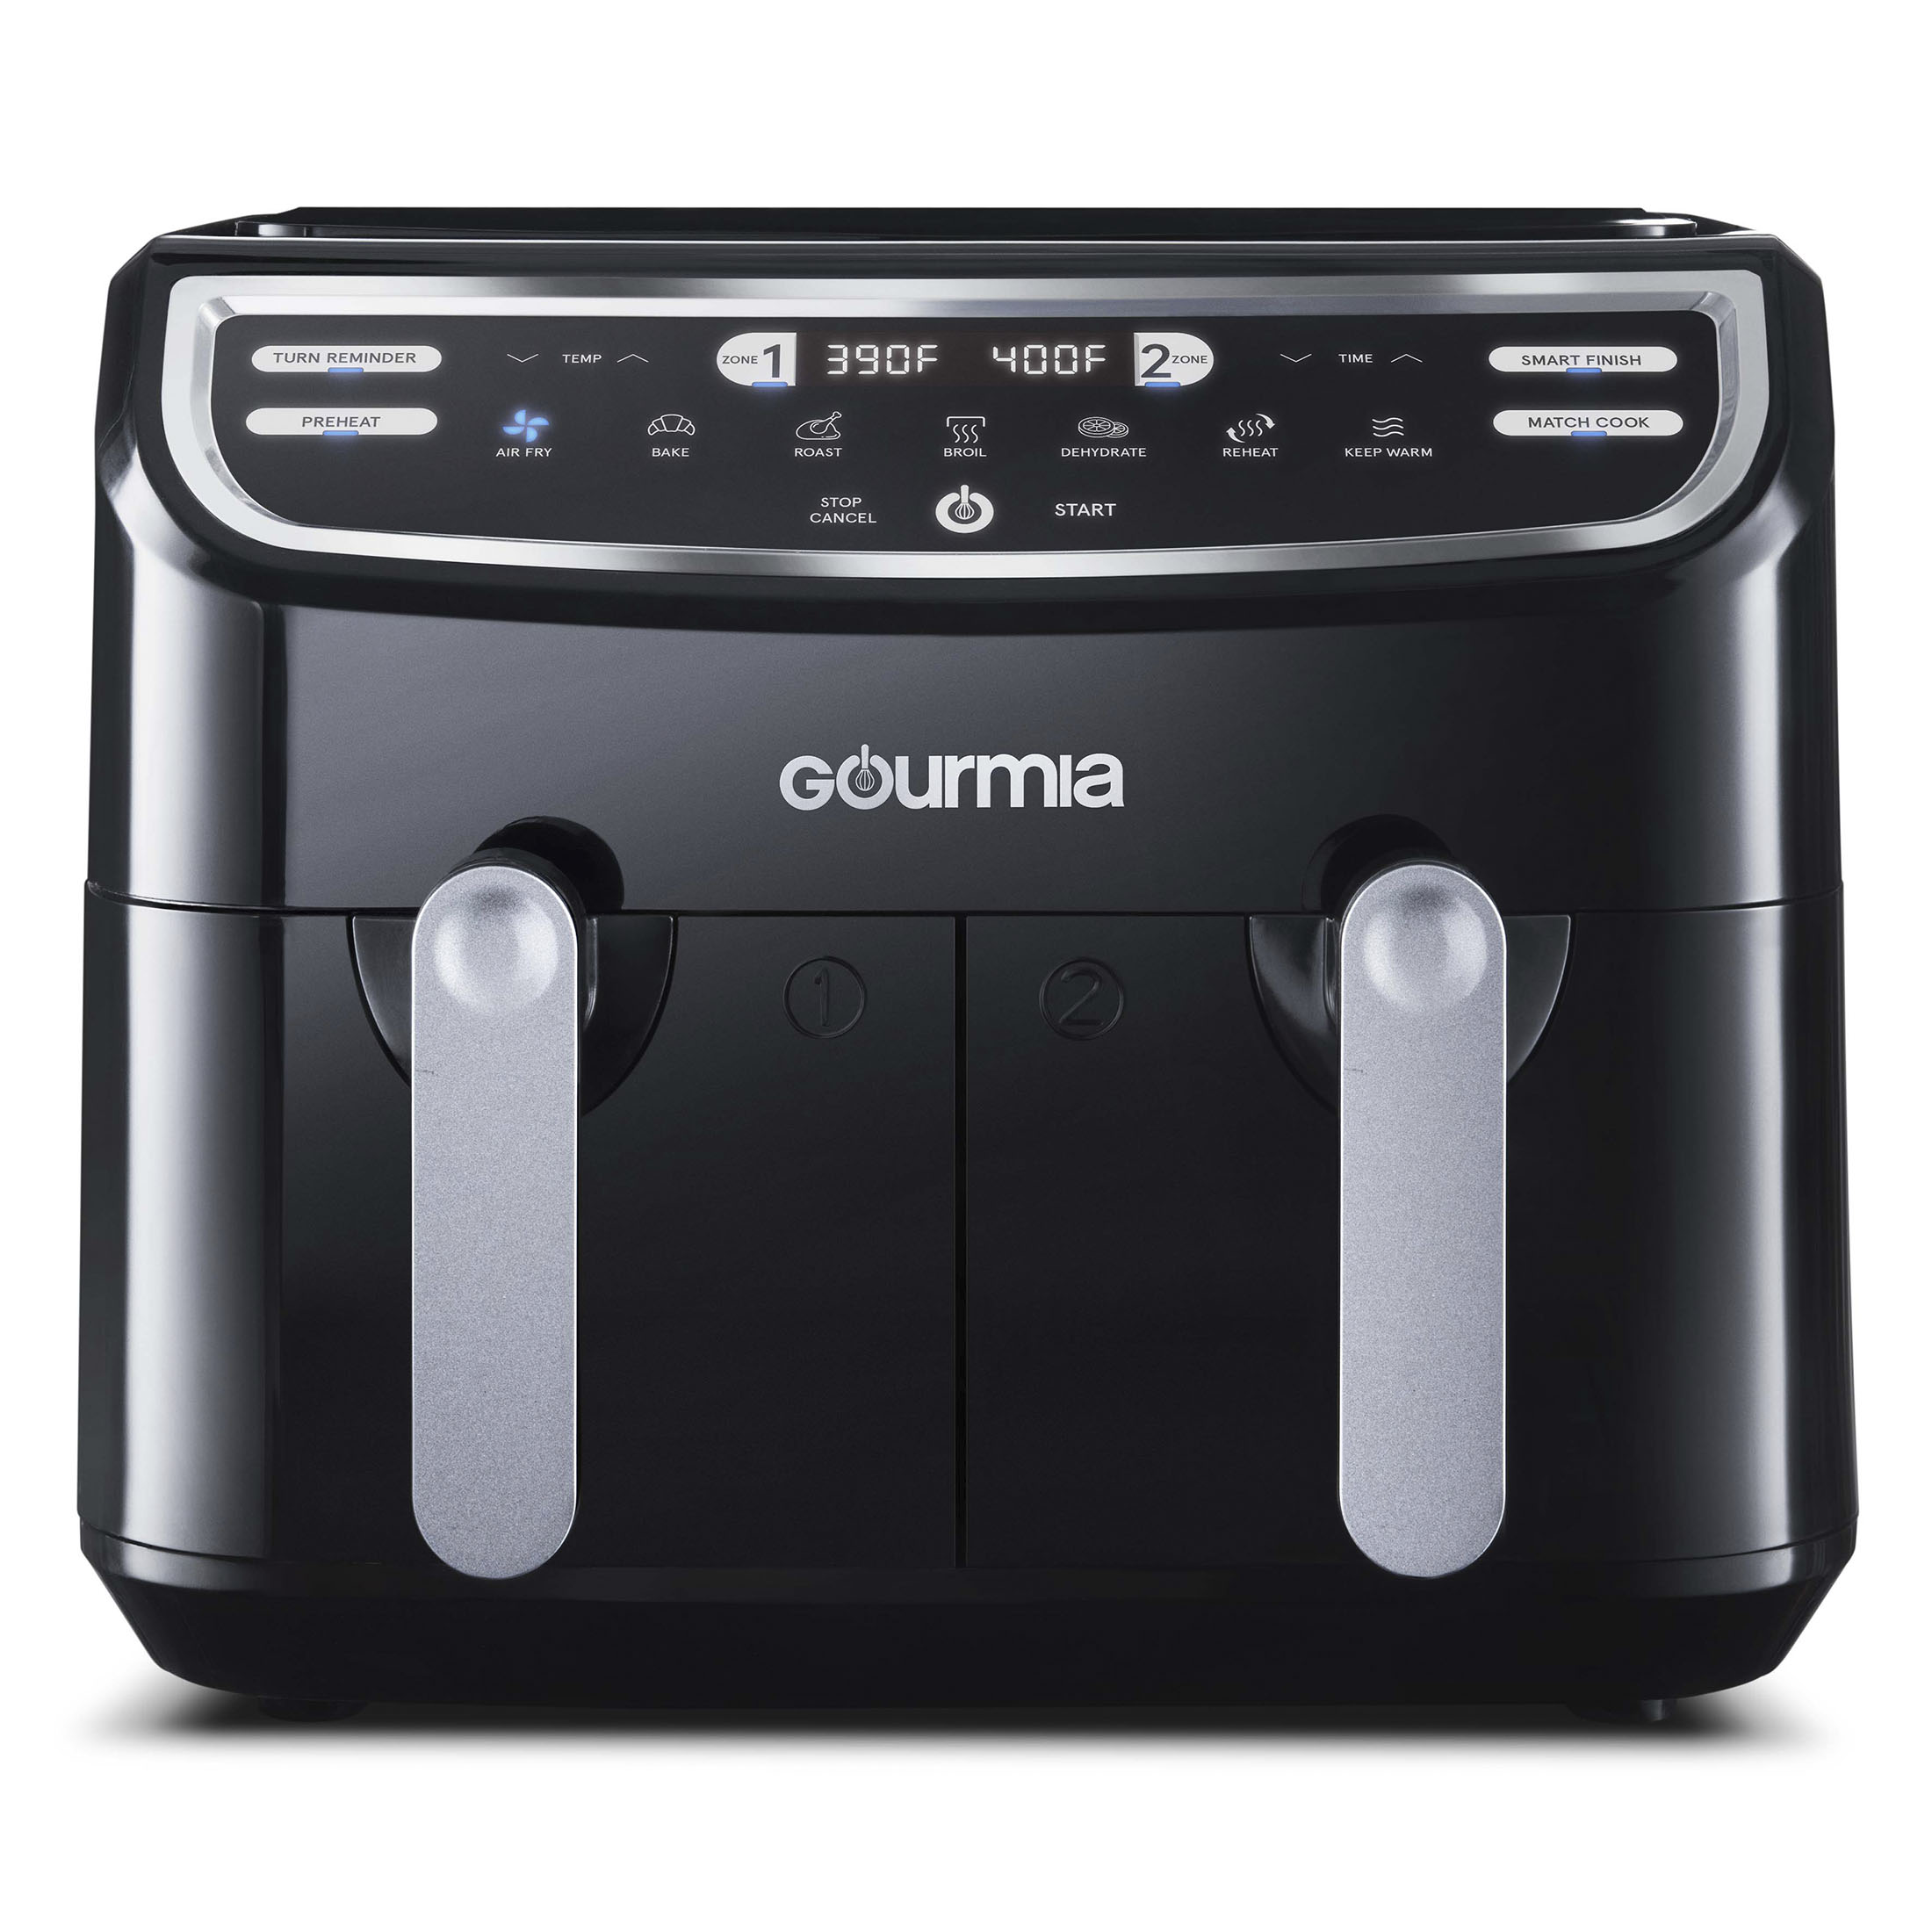 Gourmia 9 Qt 7-in-1 Dual Basket Digital Air Fryer with Smart Finish, BLK, 12.598 H, New - image 3 of 14